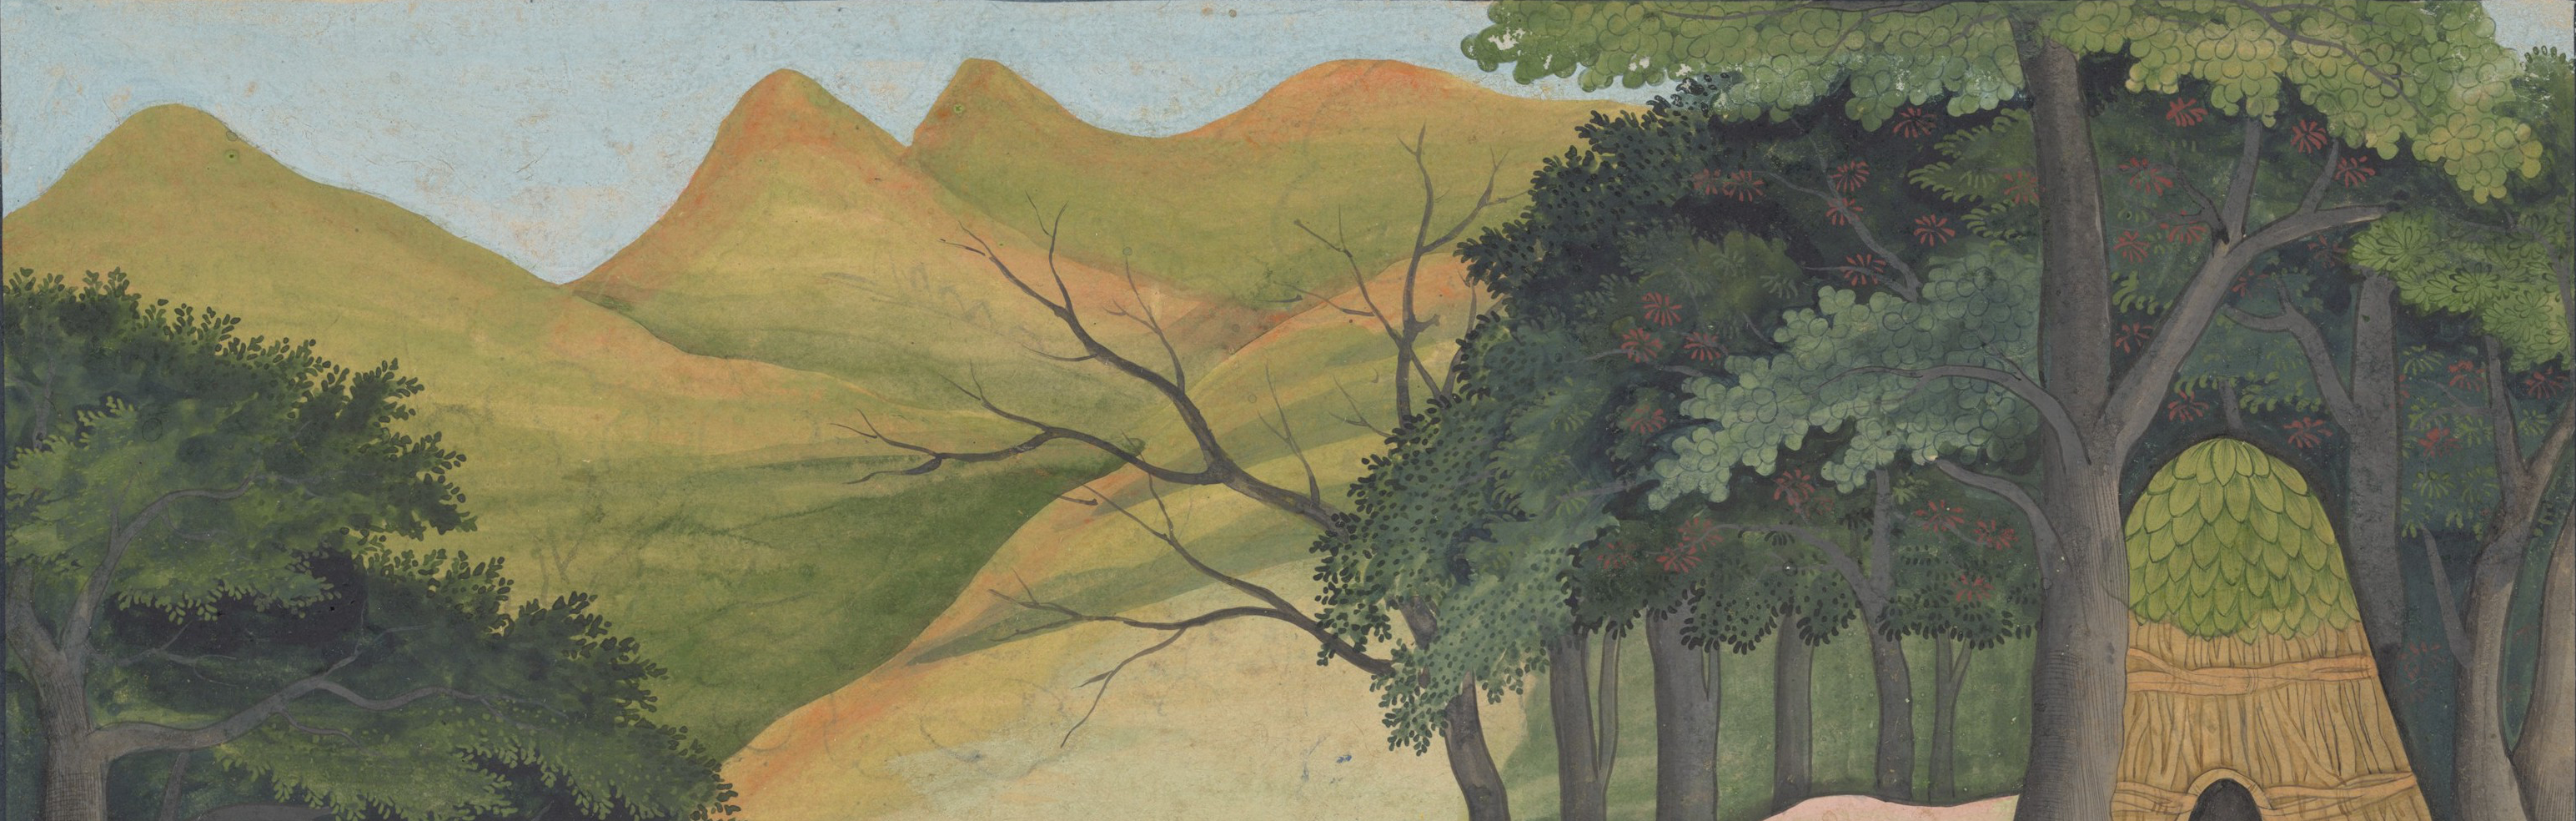 A landscape painting of distant mountains with an ascetic's hut set in amongst a forest.